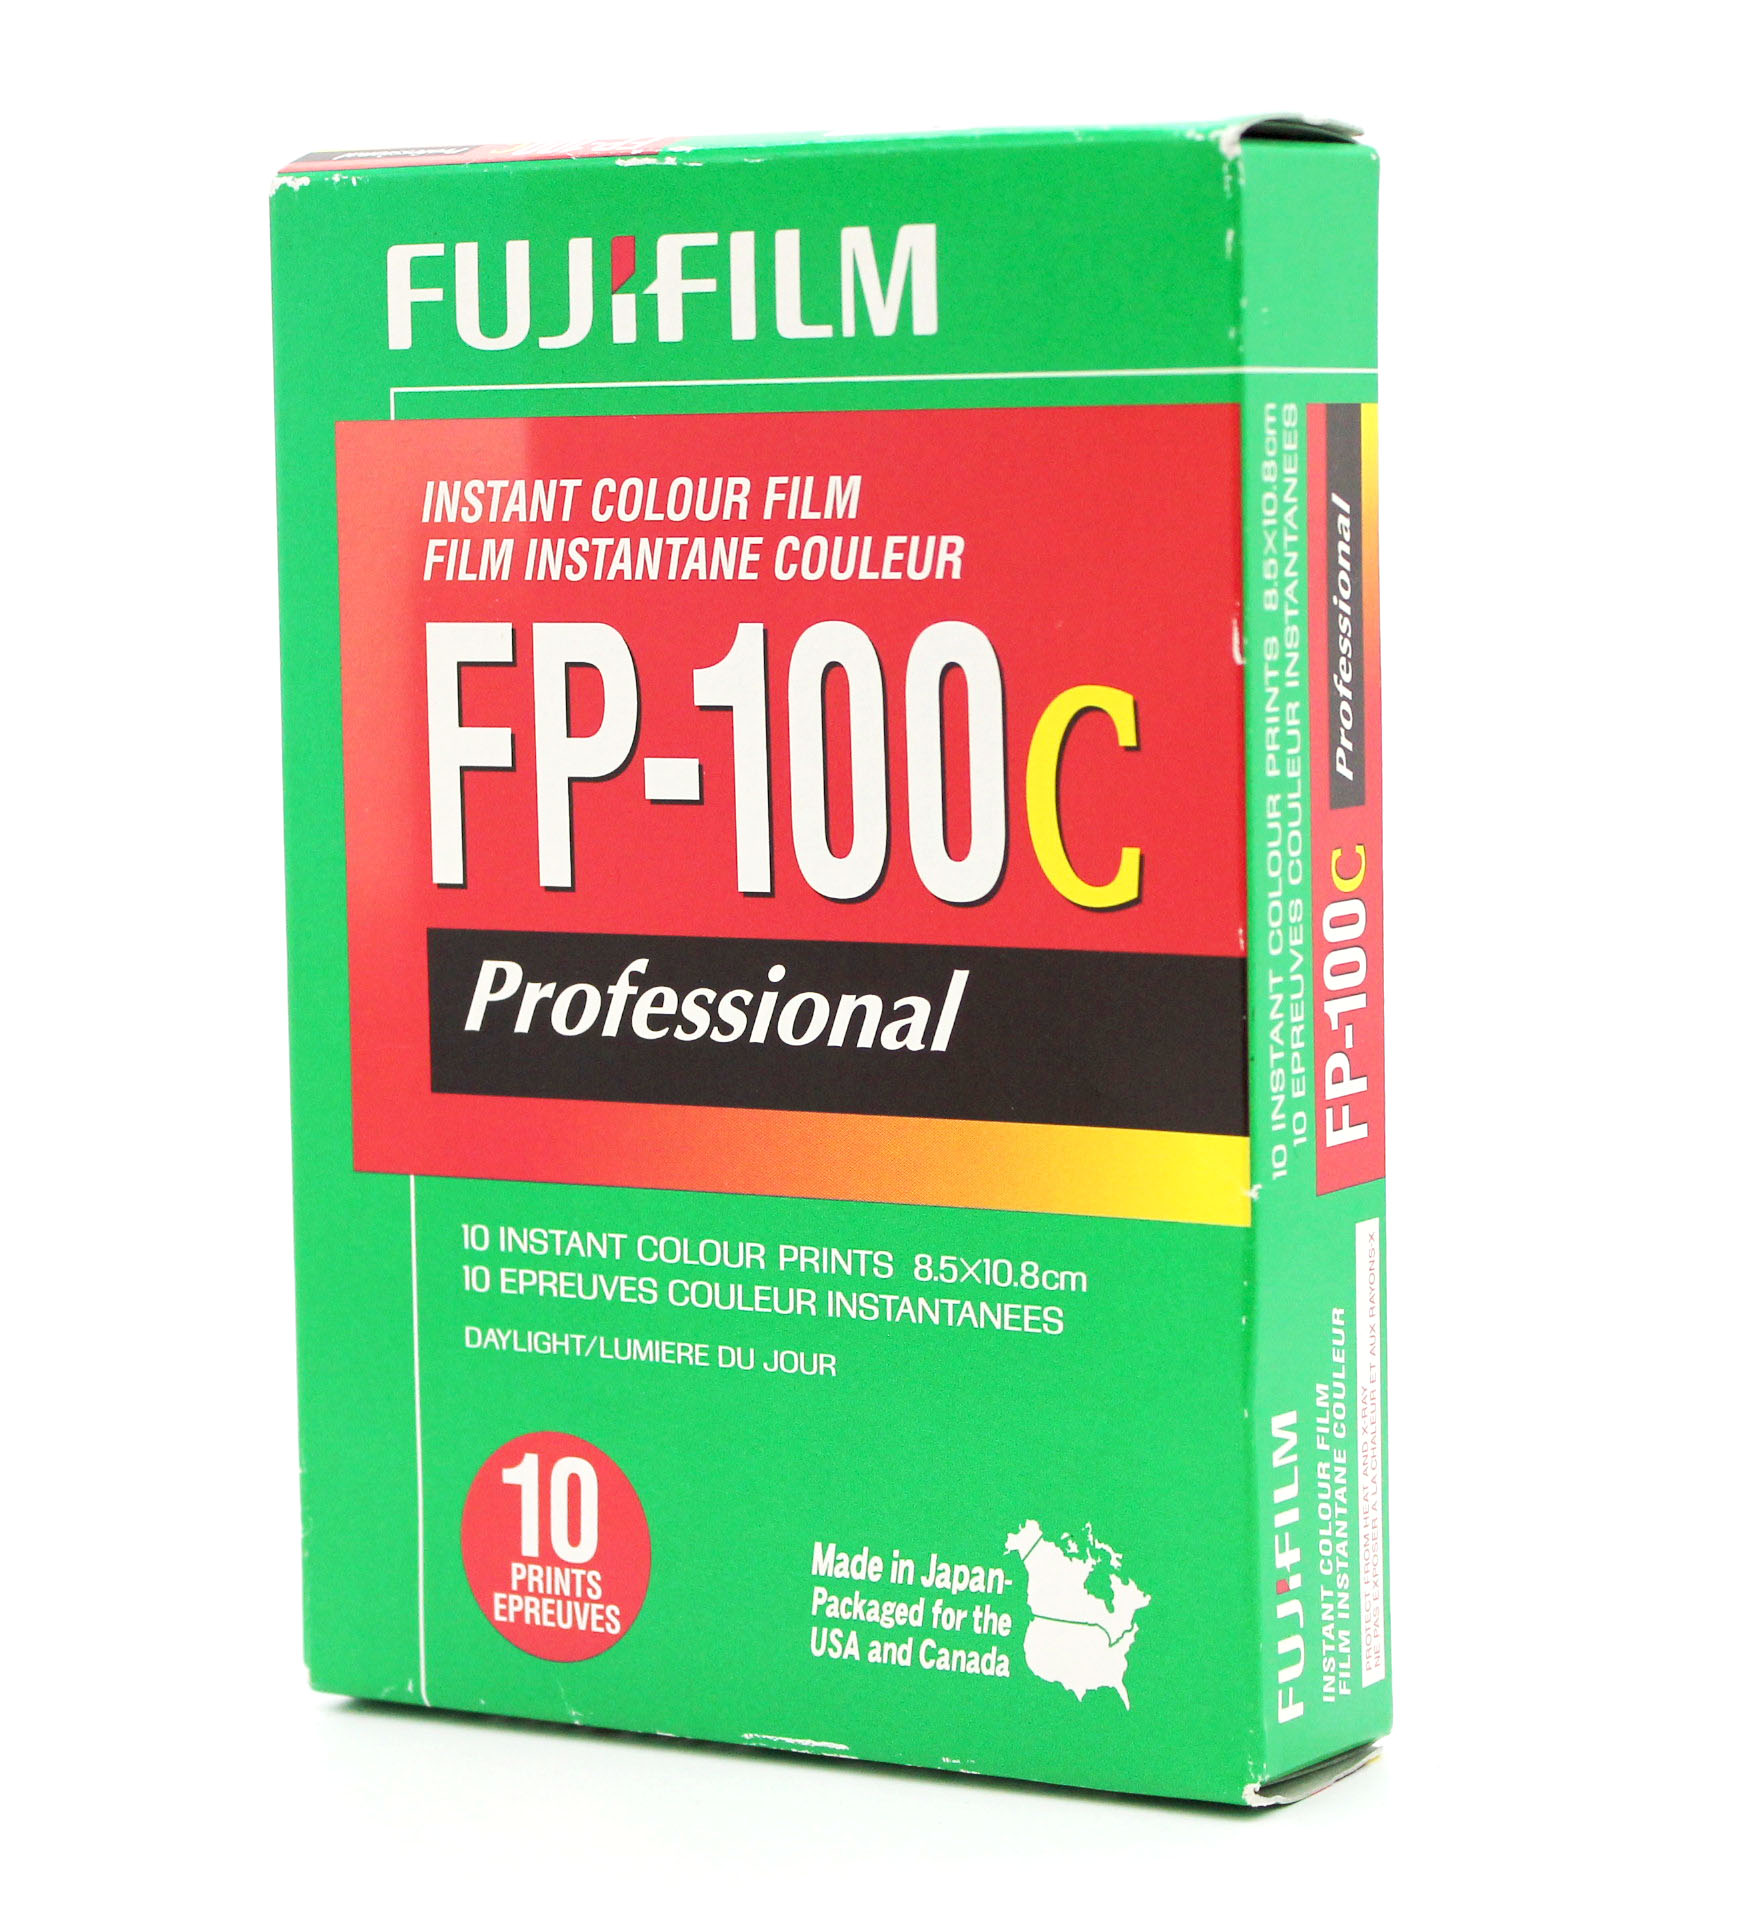  Fujifilm FP-100C Professional Instant Color Film (Exp 2014) from Japan Photo 0